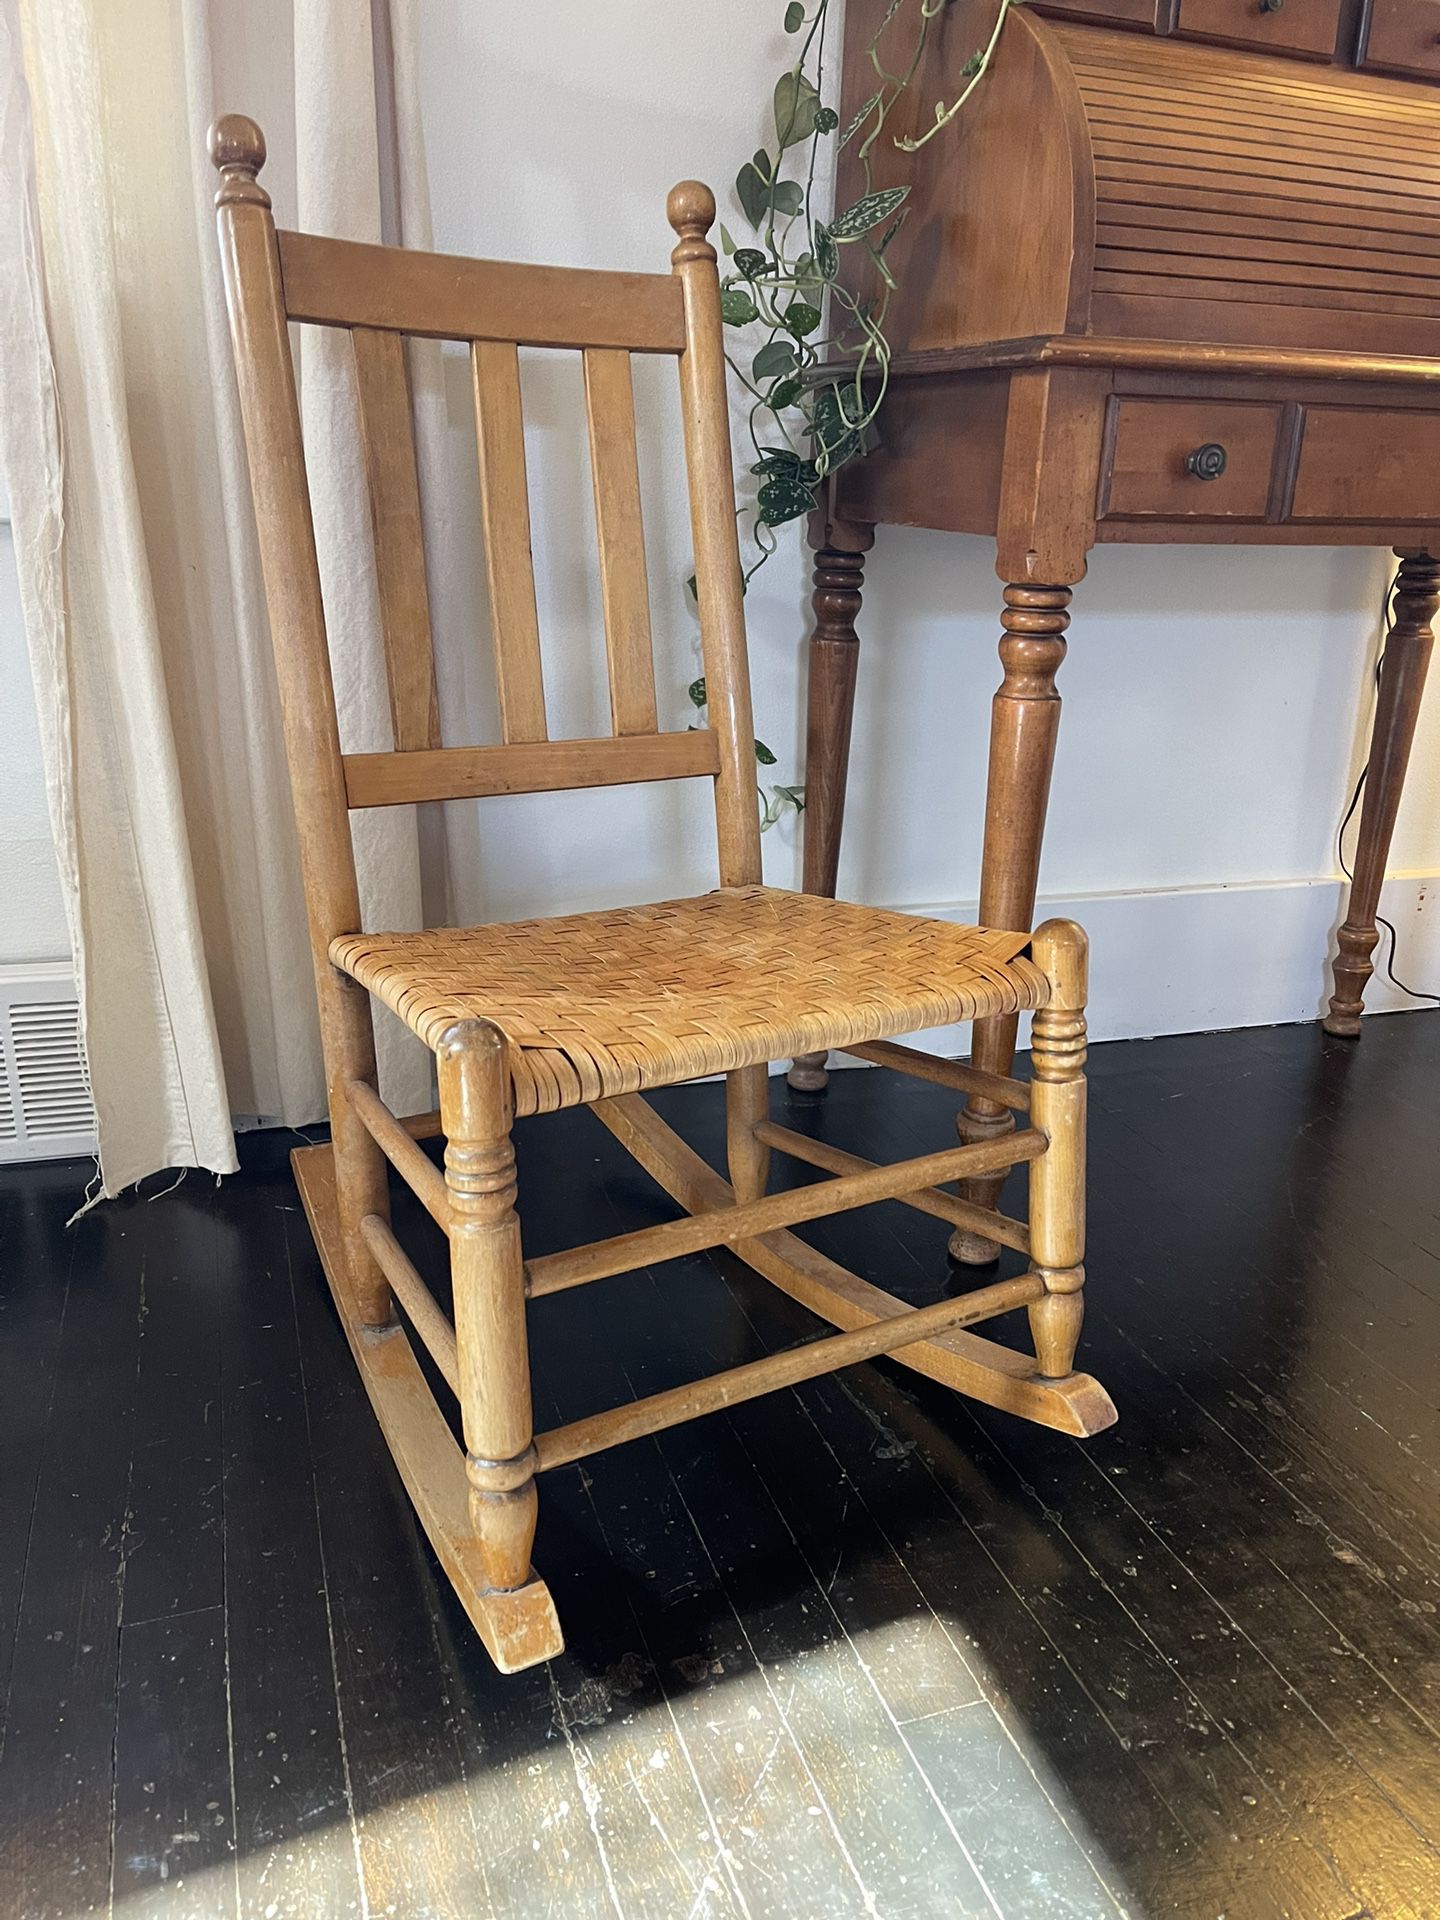 Vintage Wood Childrens Woven Seat Rocking Chair